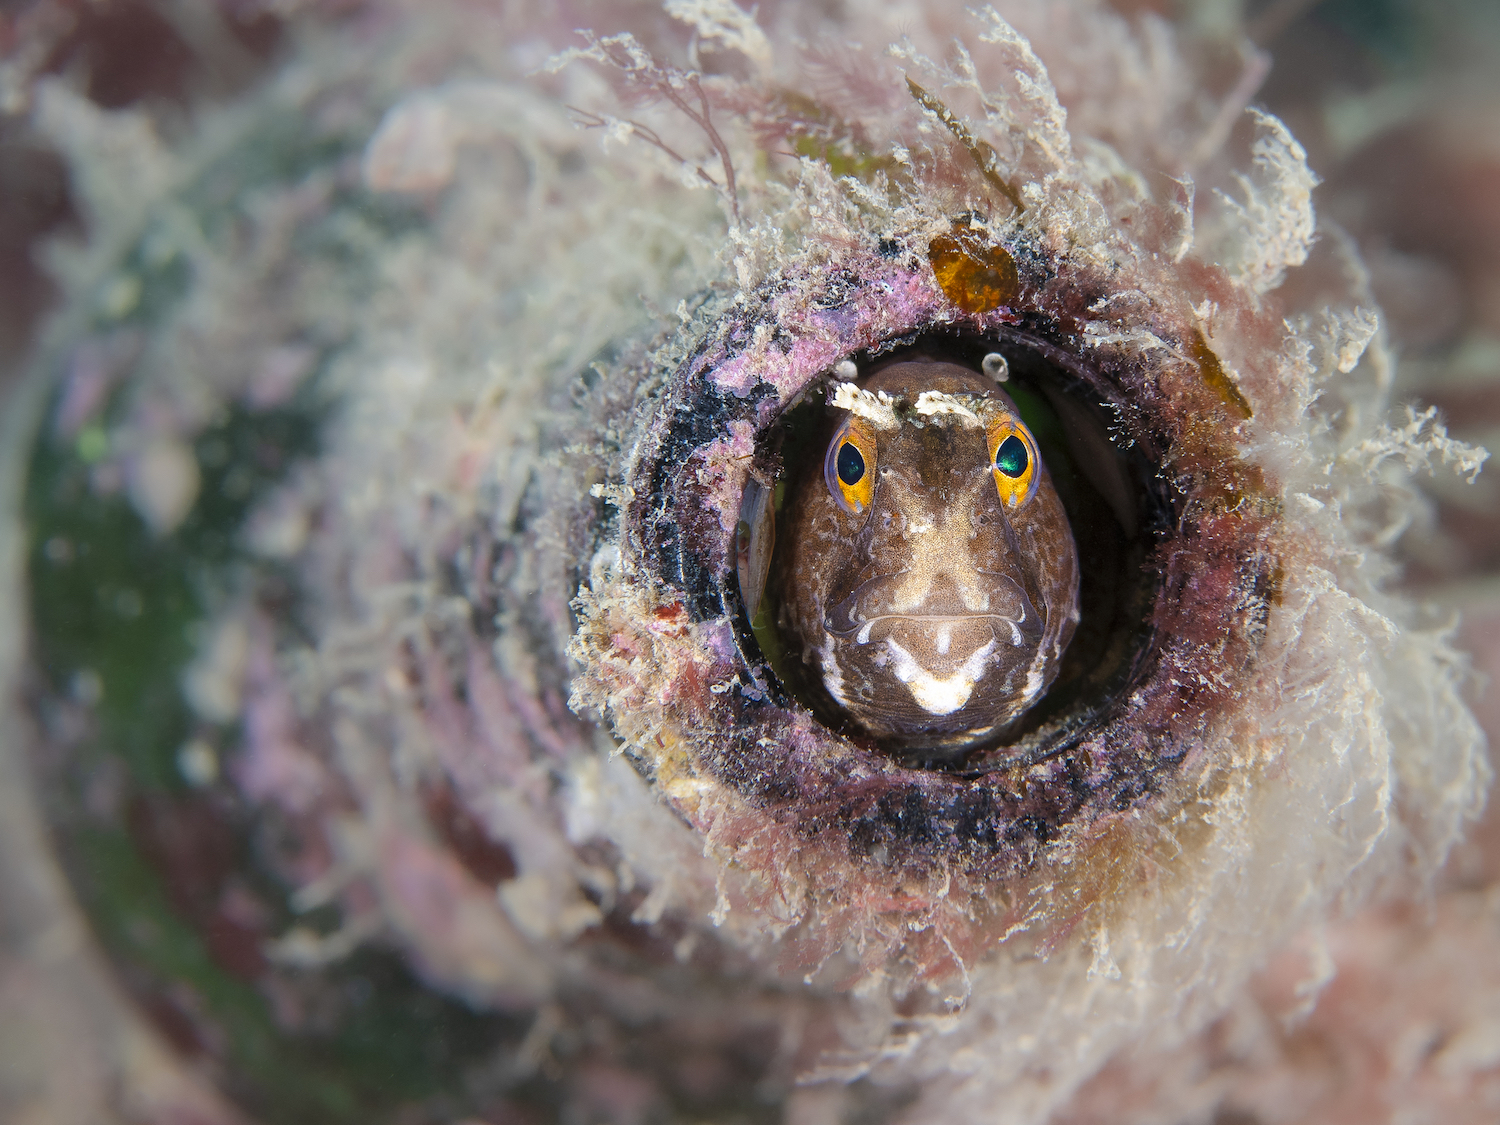 a small fish with yellow eyes peeks out from inside a glass bottle